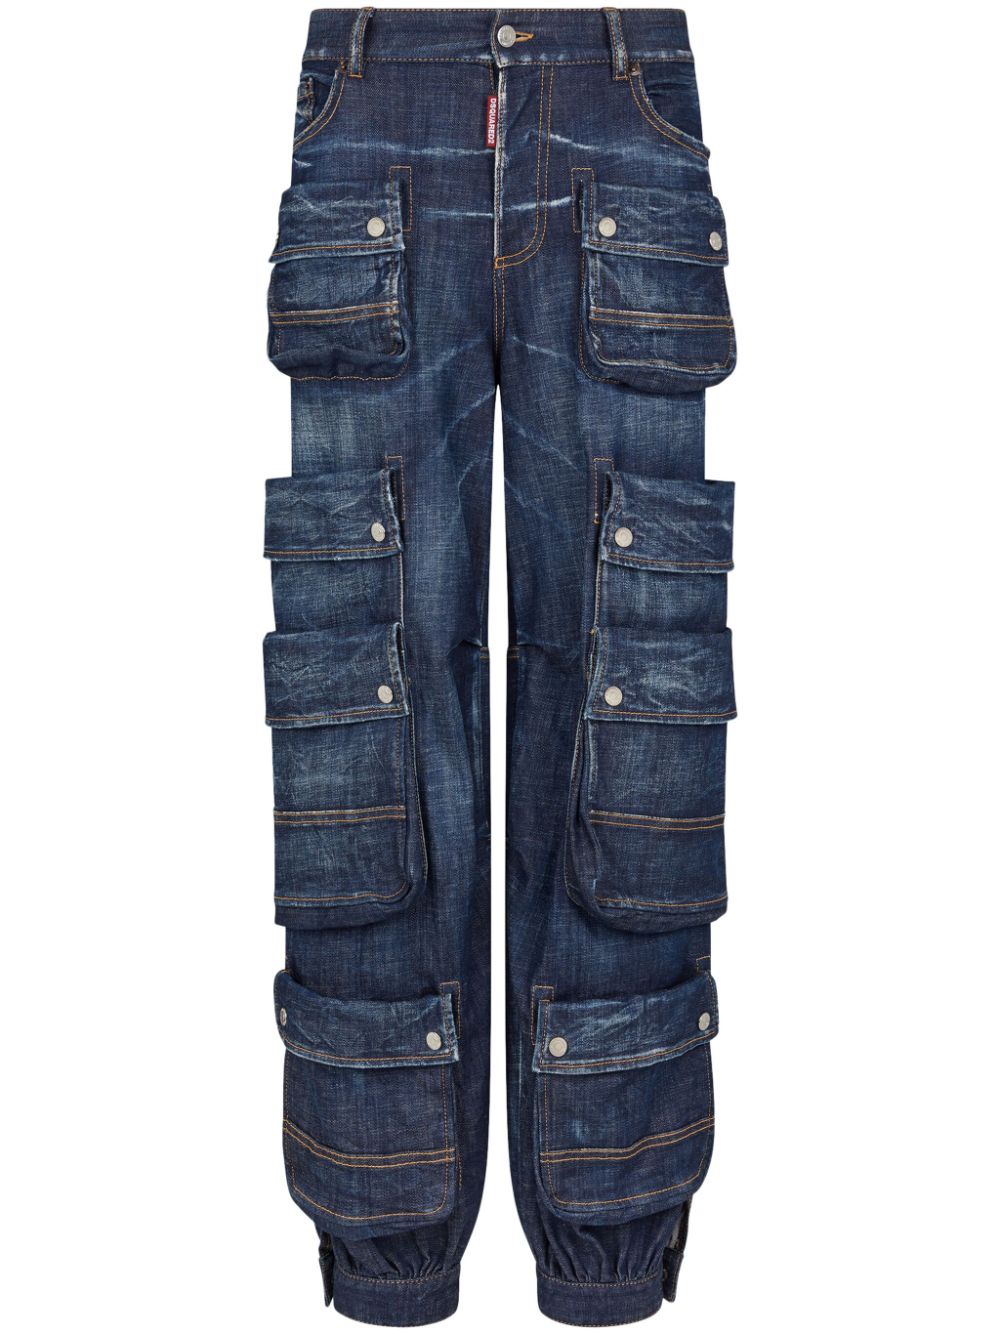 Jeans with cargo pockets